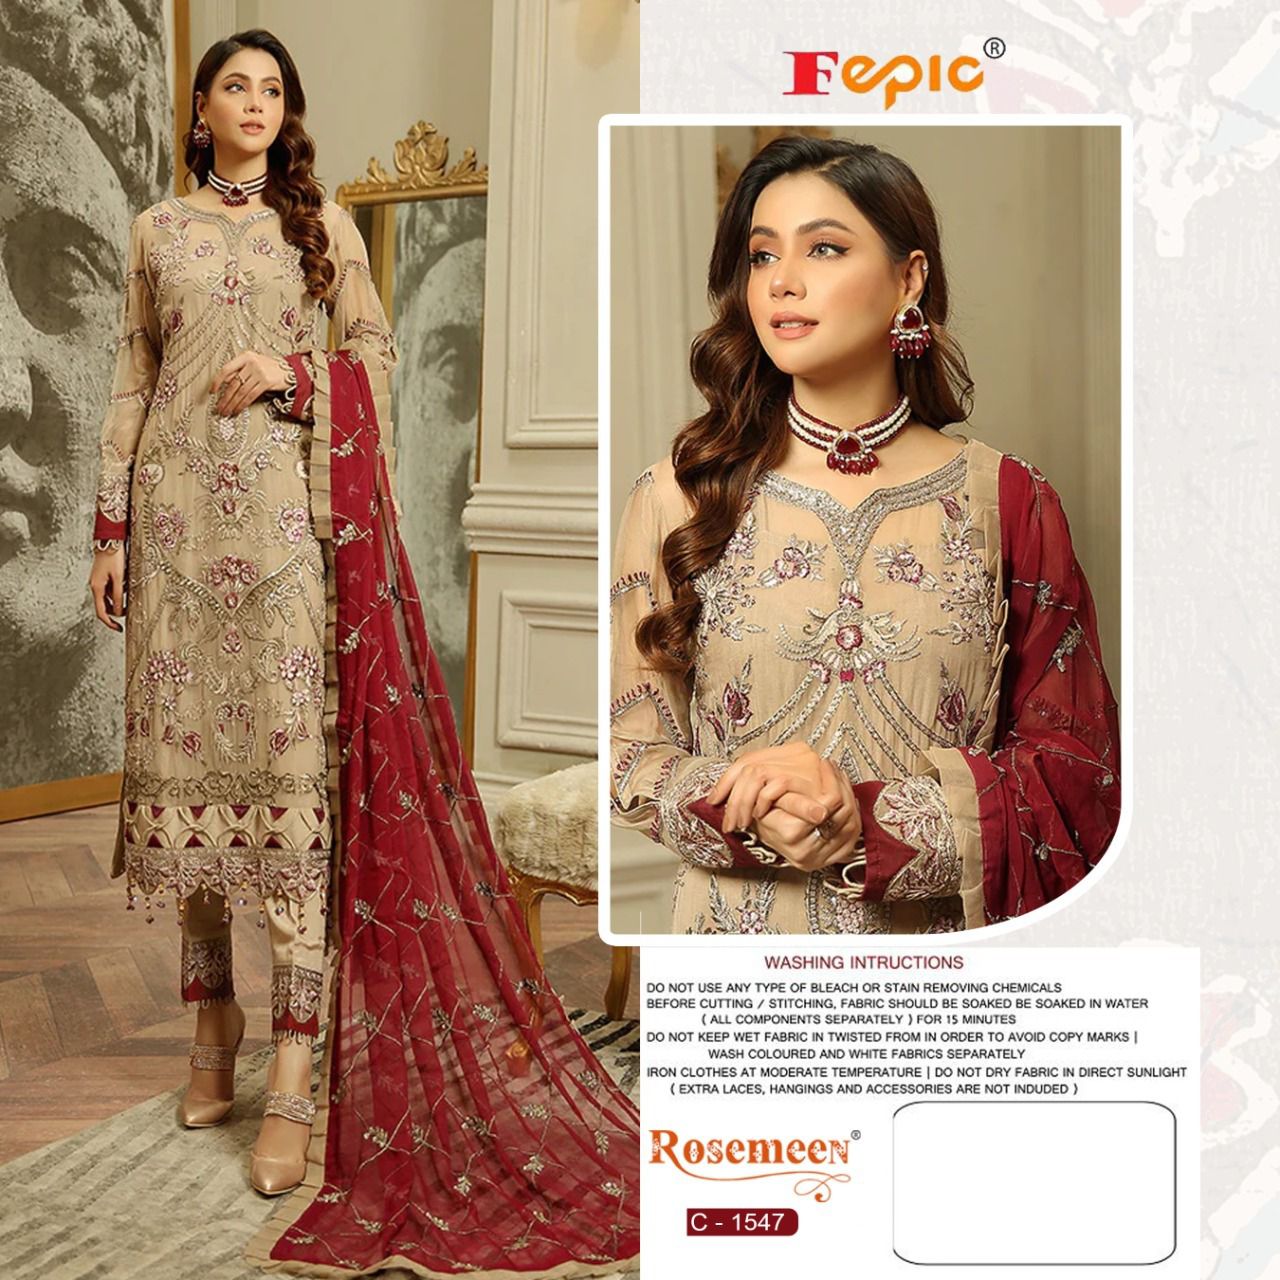 Buy Georgette Embroidered Rosemeen C 1547 Fepic Pakistani Sa